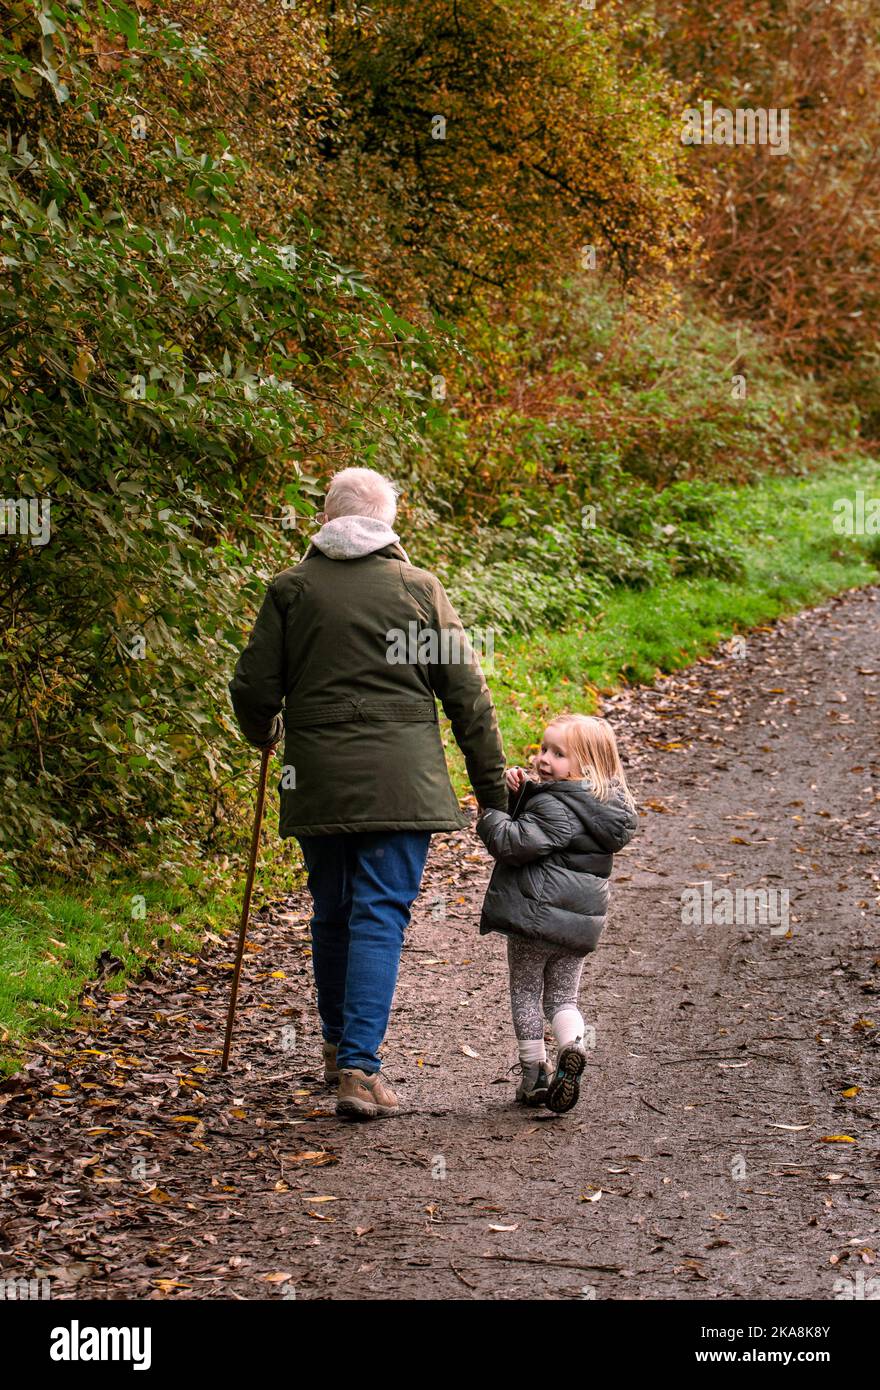 old people walking with young child Stock Photo